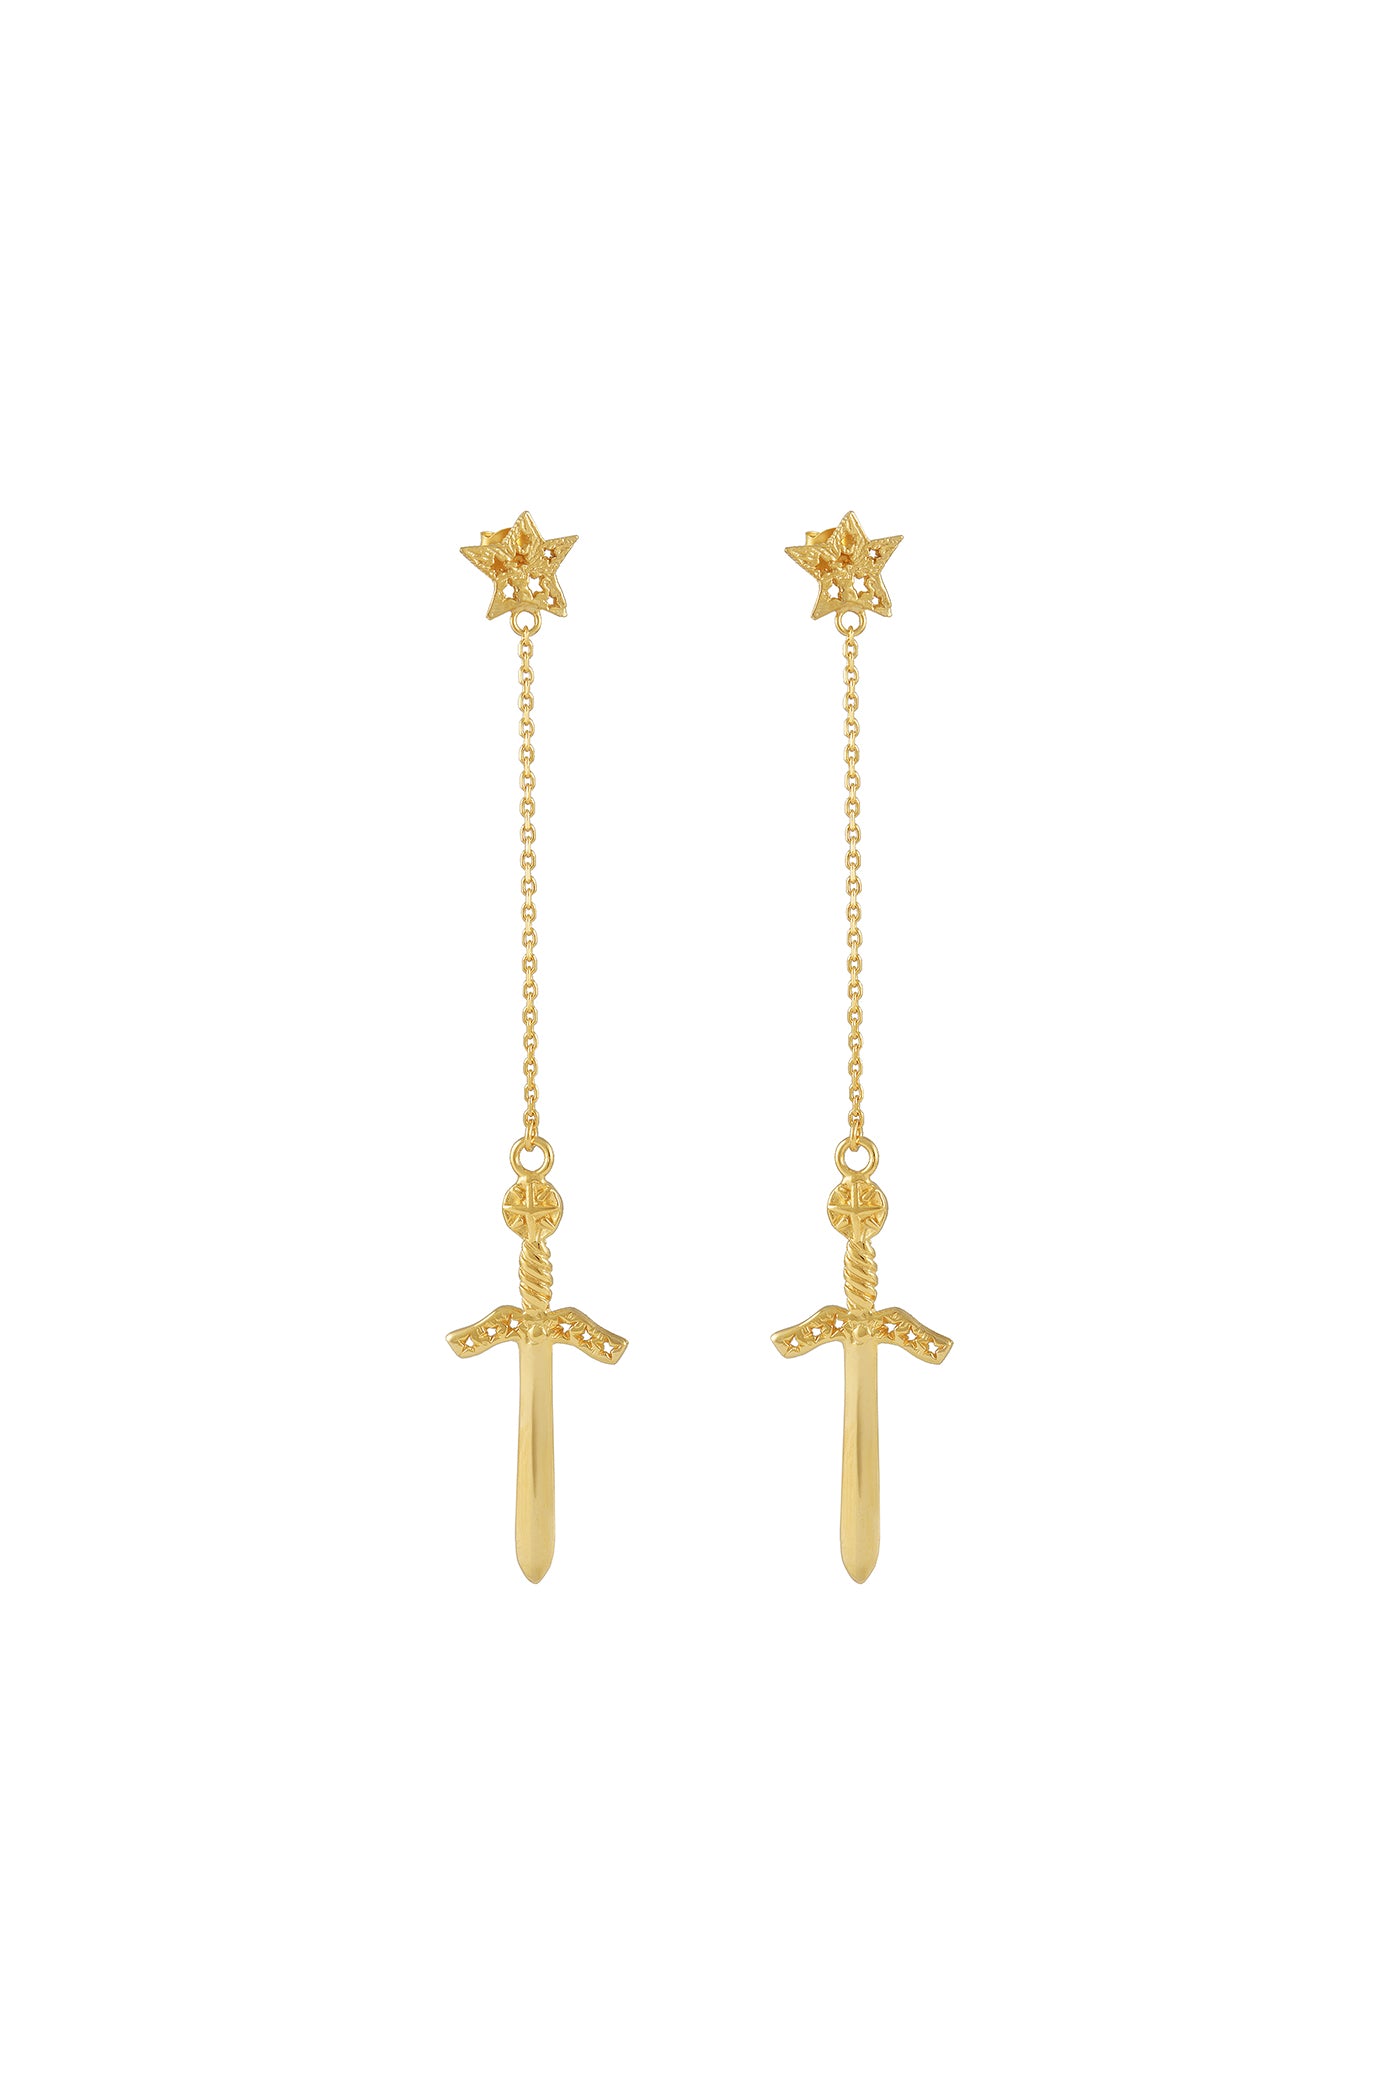 Magic knife star earrings  on the chain 8 cm. Silver, gold plated